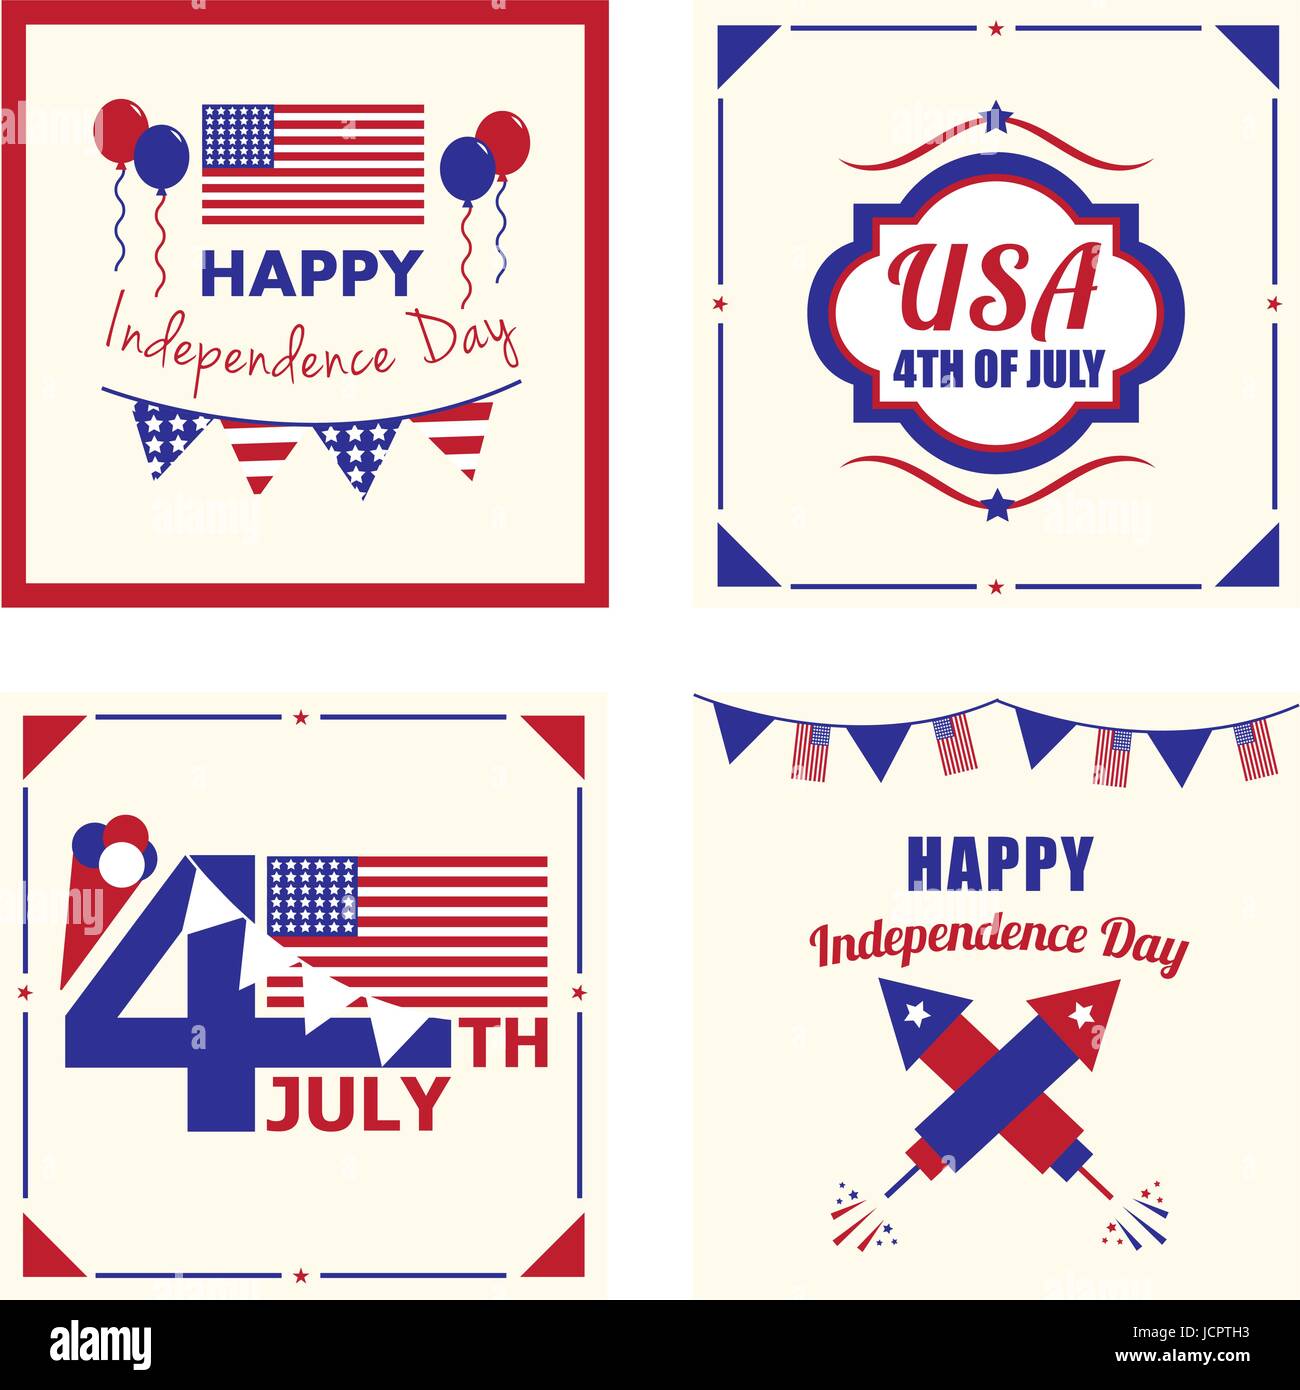 Card with happy independence day text Stock Vector